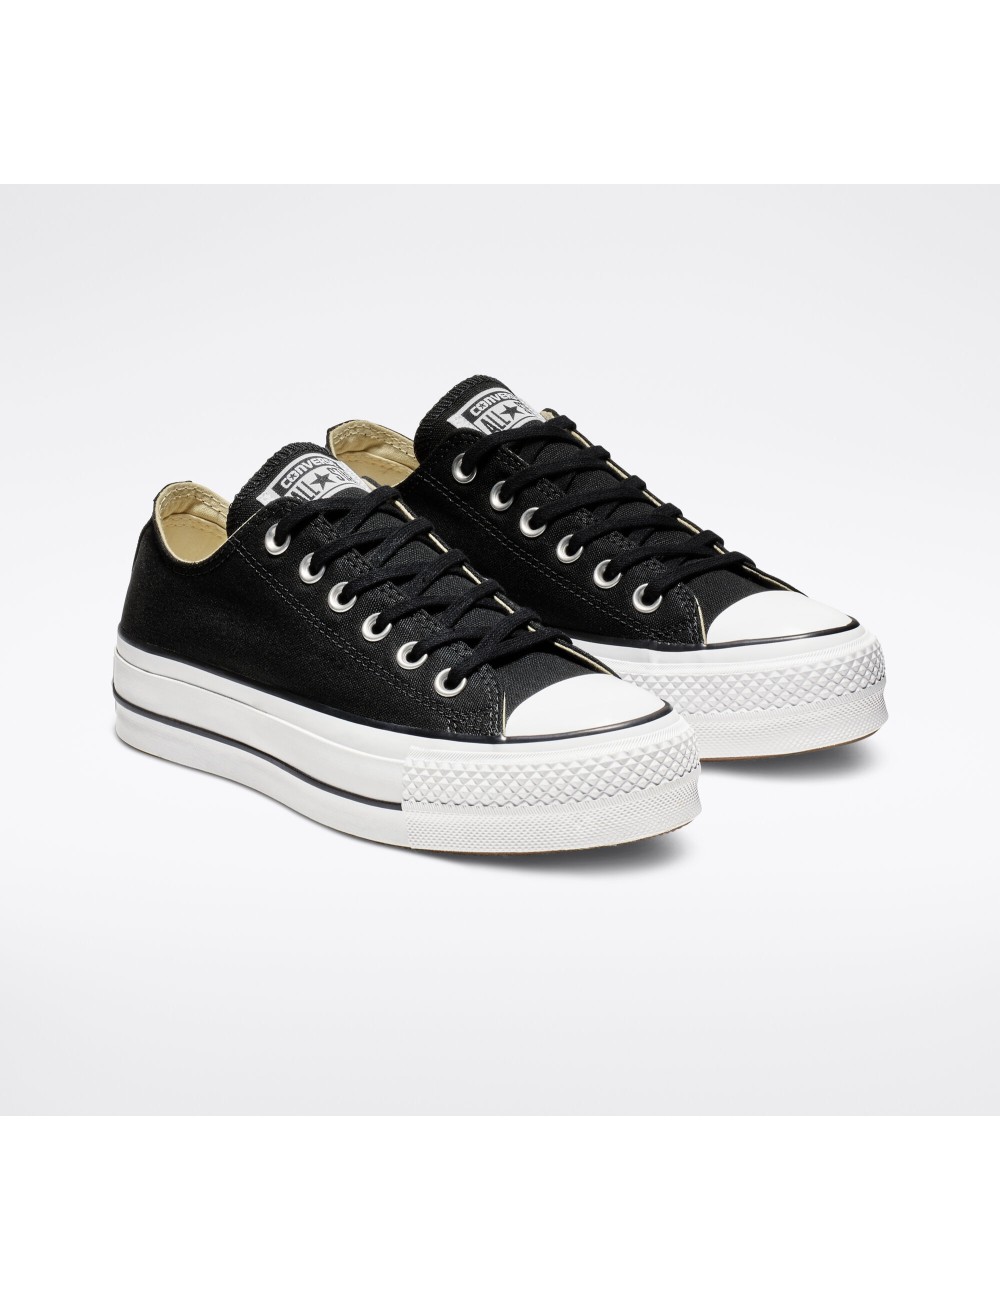 SNEAKERS UNISEX CONVERSE CHUCK TAYLOR ALL STAR LIFT BLACK